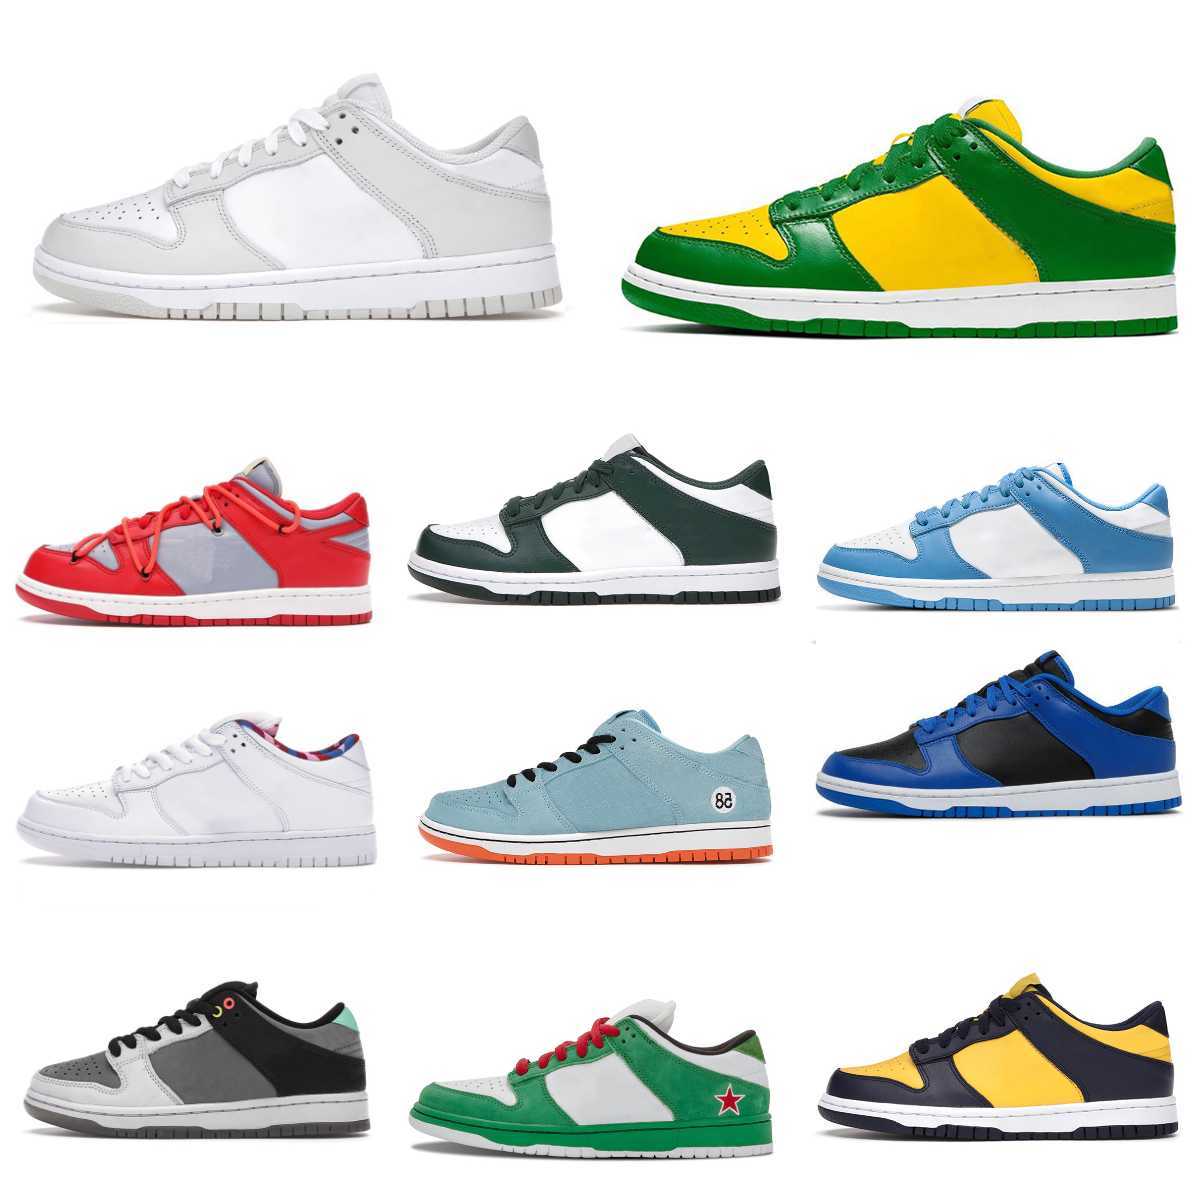 

Designers SB Lows Running Shoes DuNkS Grey Fog Black White UNC University Red Women Men Atmos Elephant Lime Ice Barely Parra Abstract Art Green Bear Trainer Sneakers, Please contact us